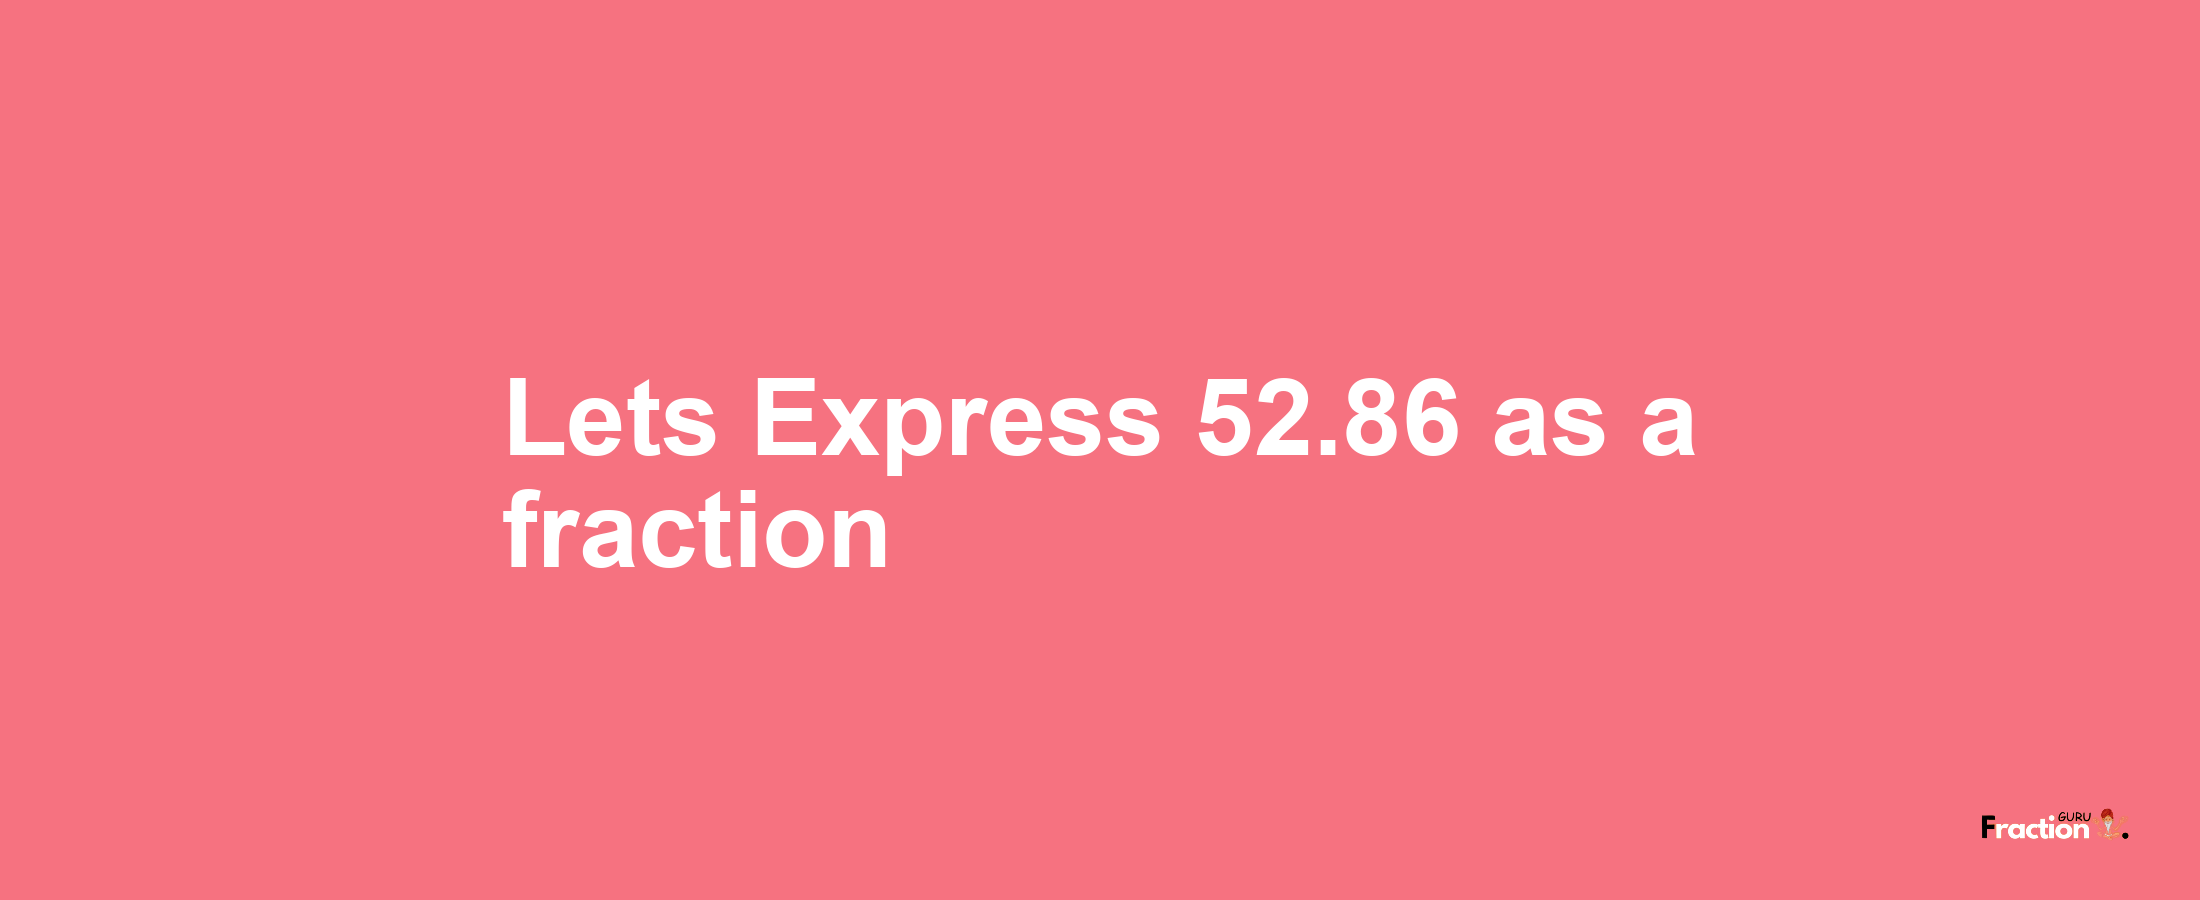 Lets Express 52.86 as afraction